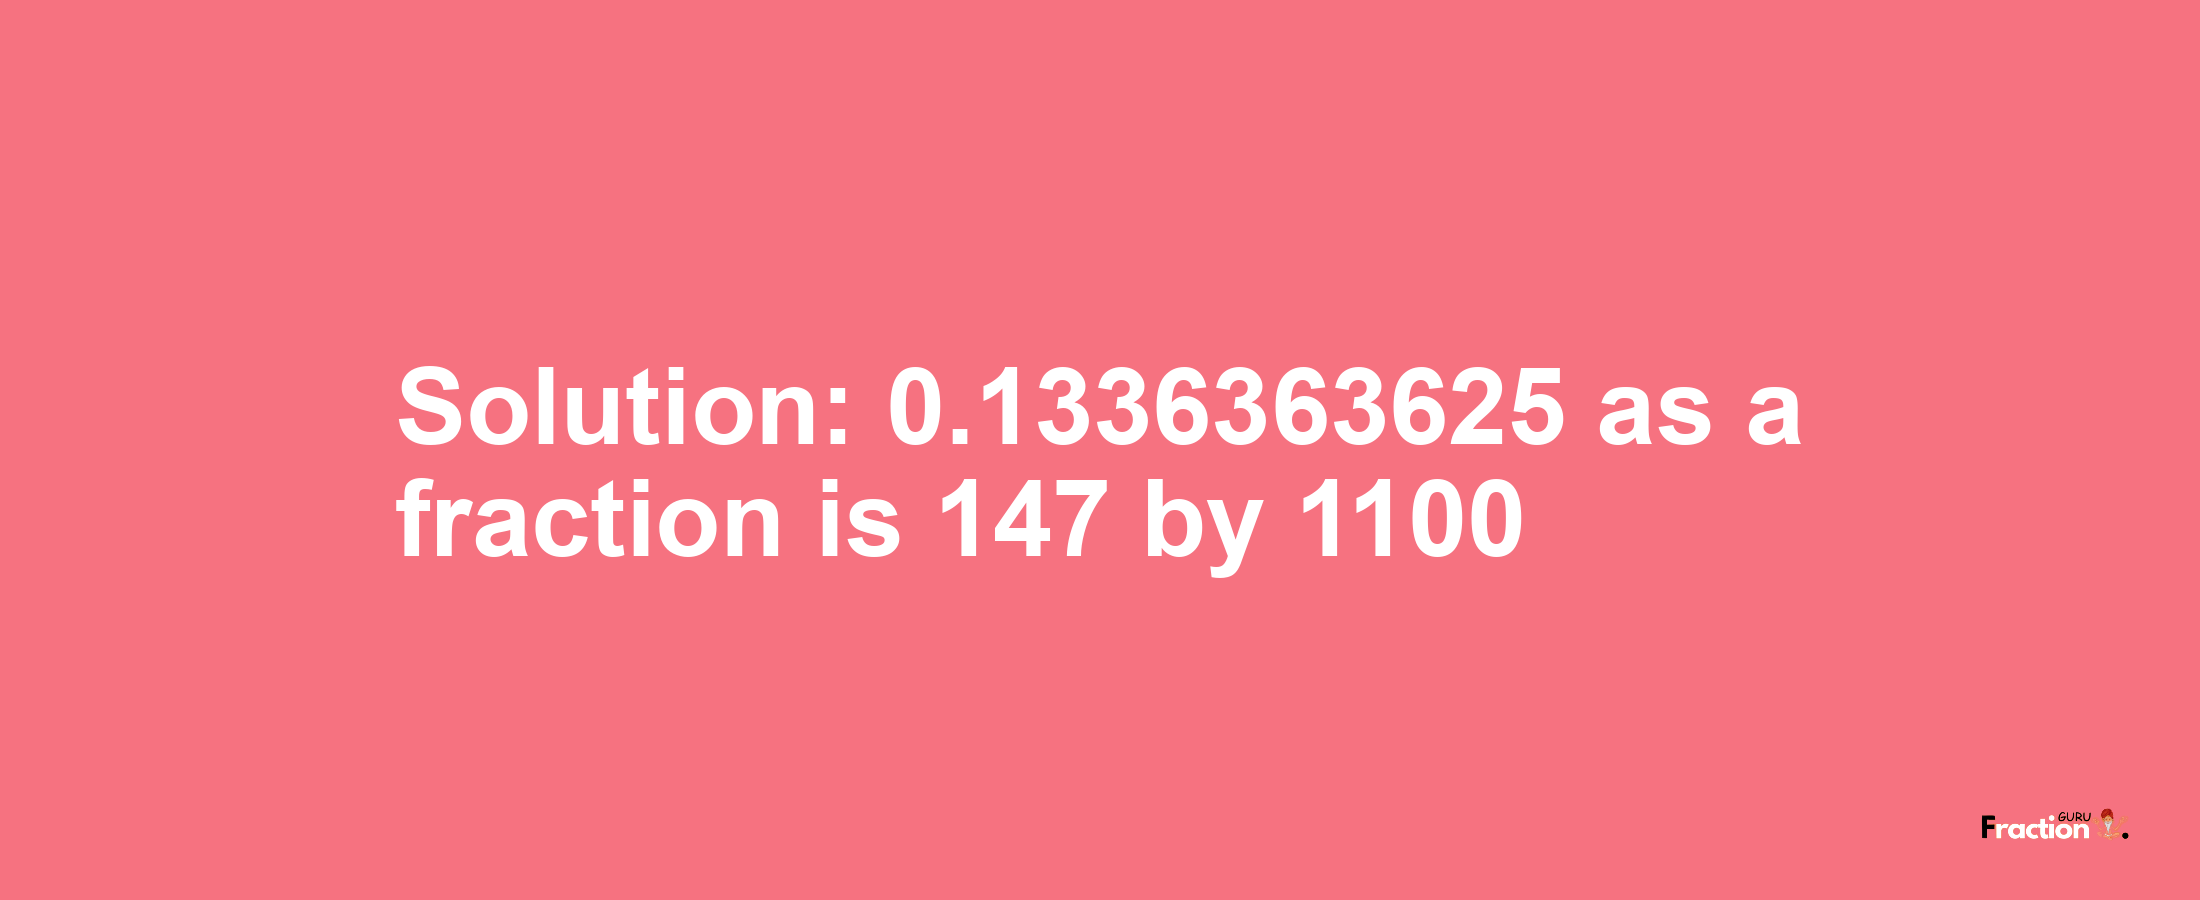 Solution:0.1336363625 as a fraction is 147/1100